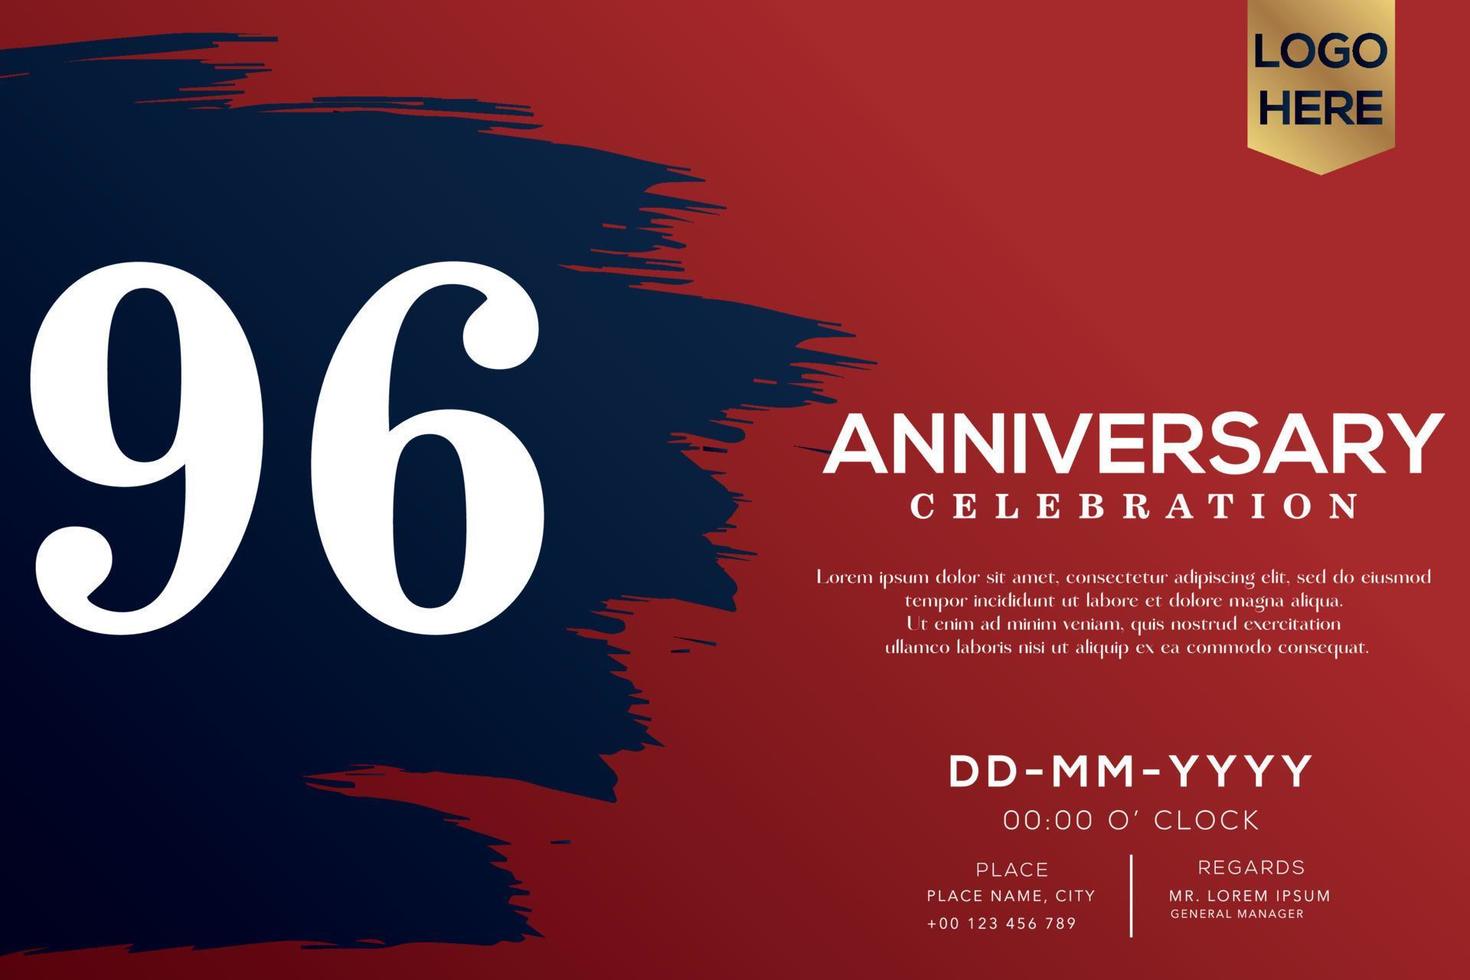 96 years anniversary celebration vector with blue brush isolated on red background with text template design